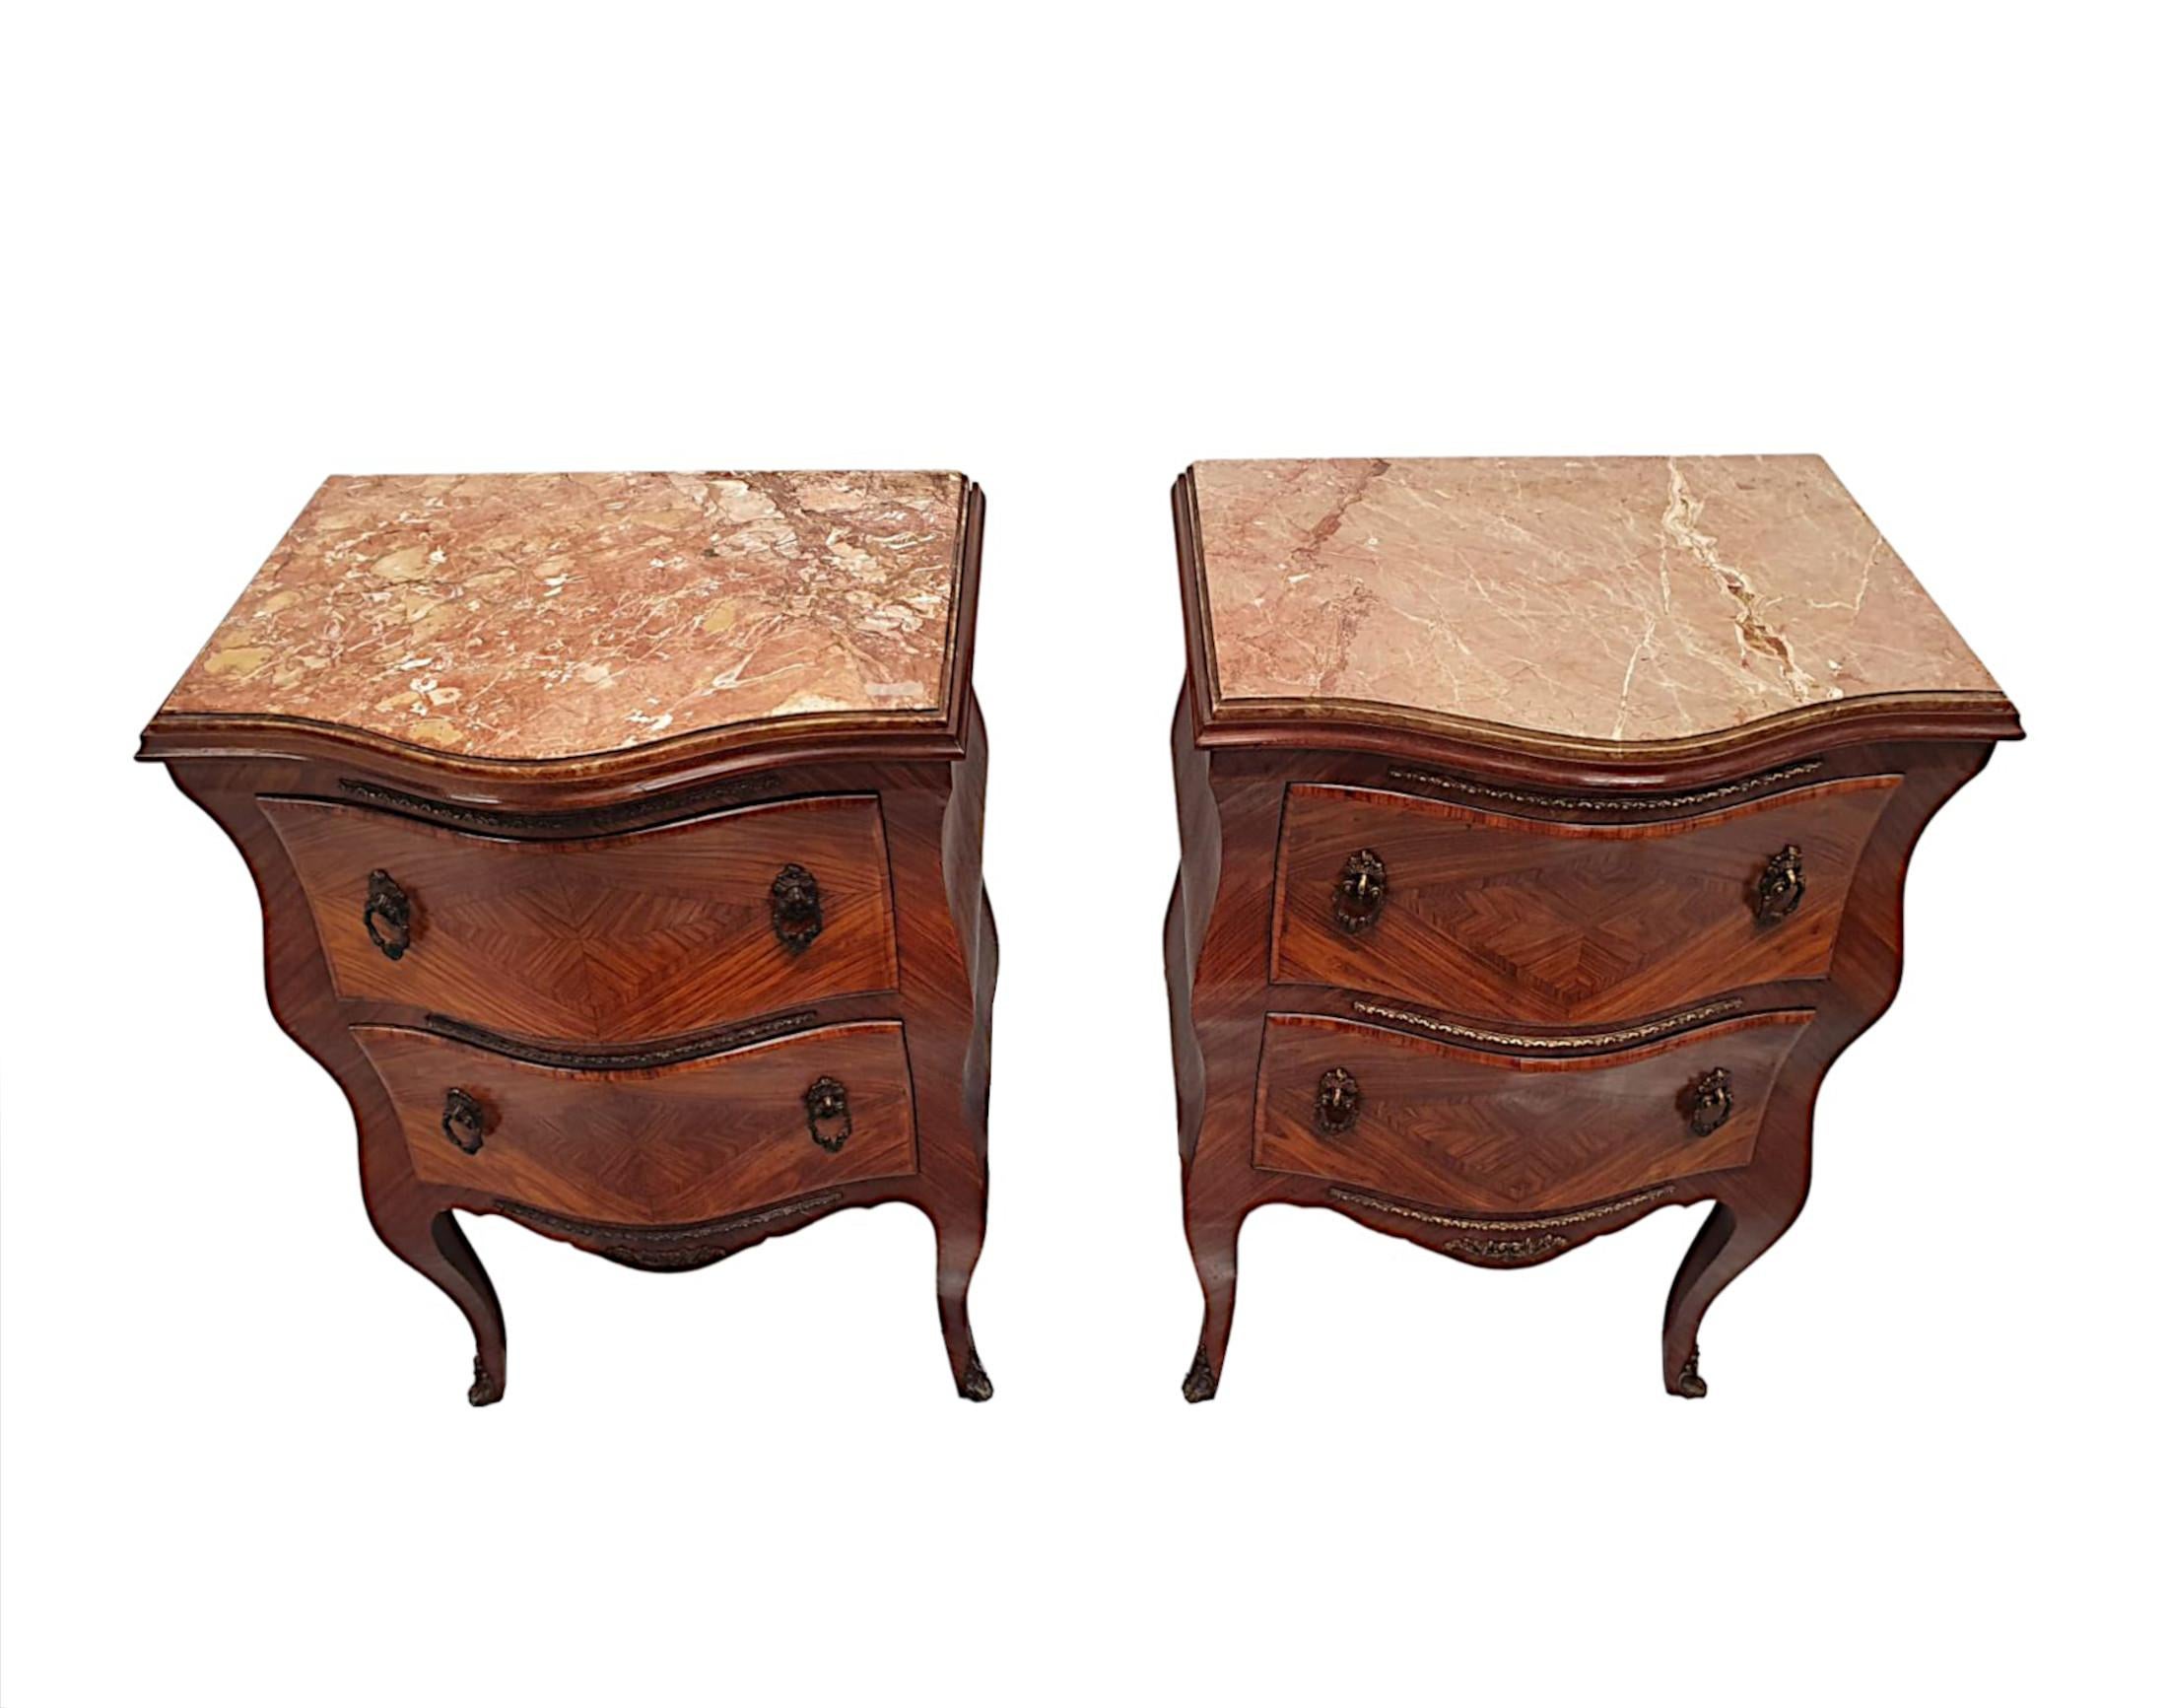 A very fine 19th Century pair of marble top kingwood chests of grand proportions, fabulously hand carved and ormolu mounted throughout with gorgeously rich patination and grain. The gorgeous moulded, serpentine Rosso Levante marble top of